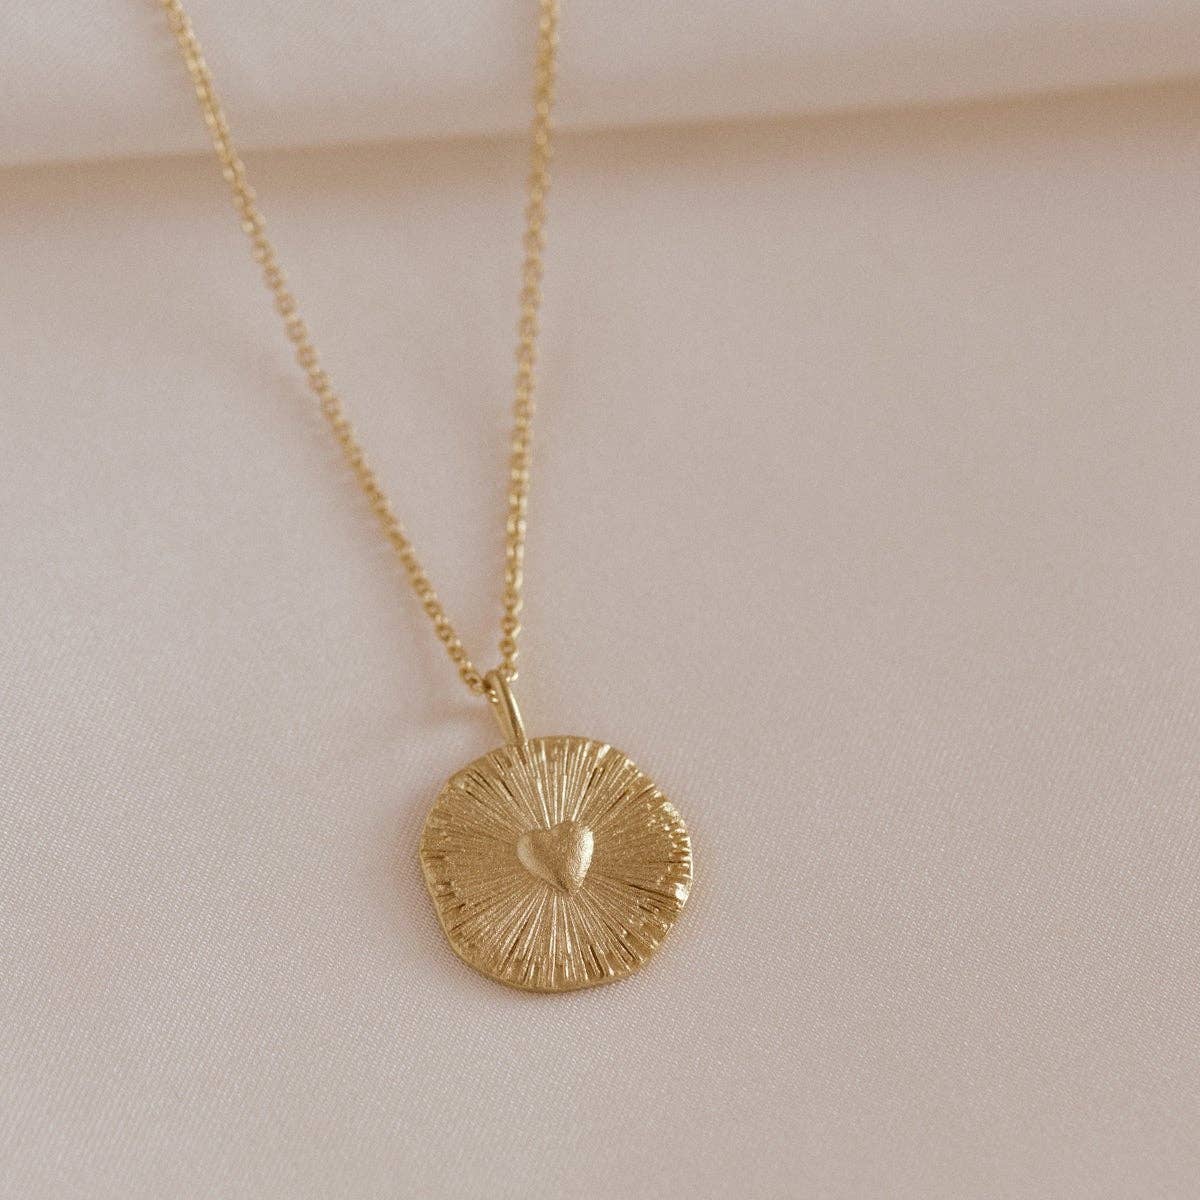 Kara Necklace | Jewelry Gold Gift Waterproof - Out of the Blue